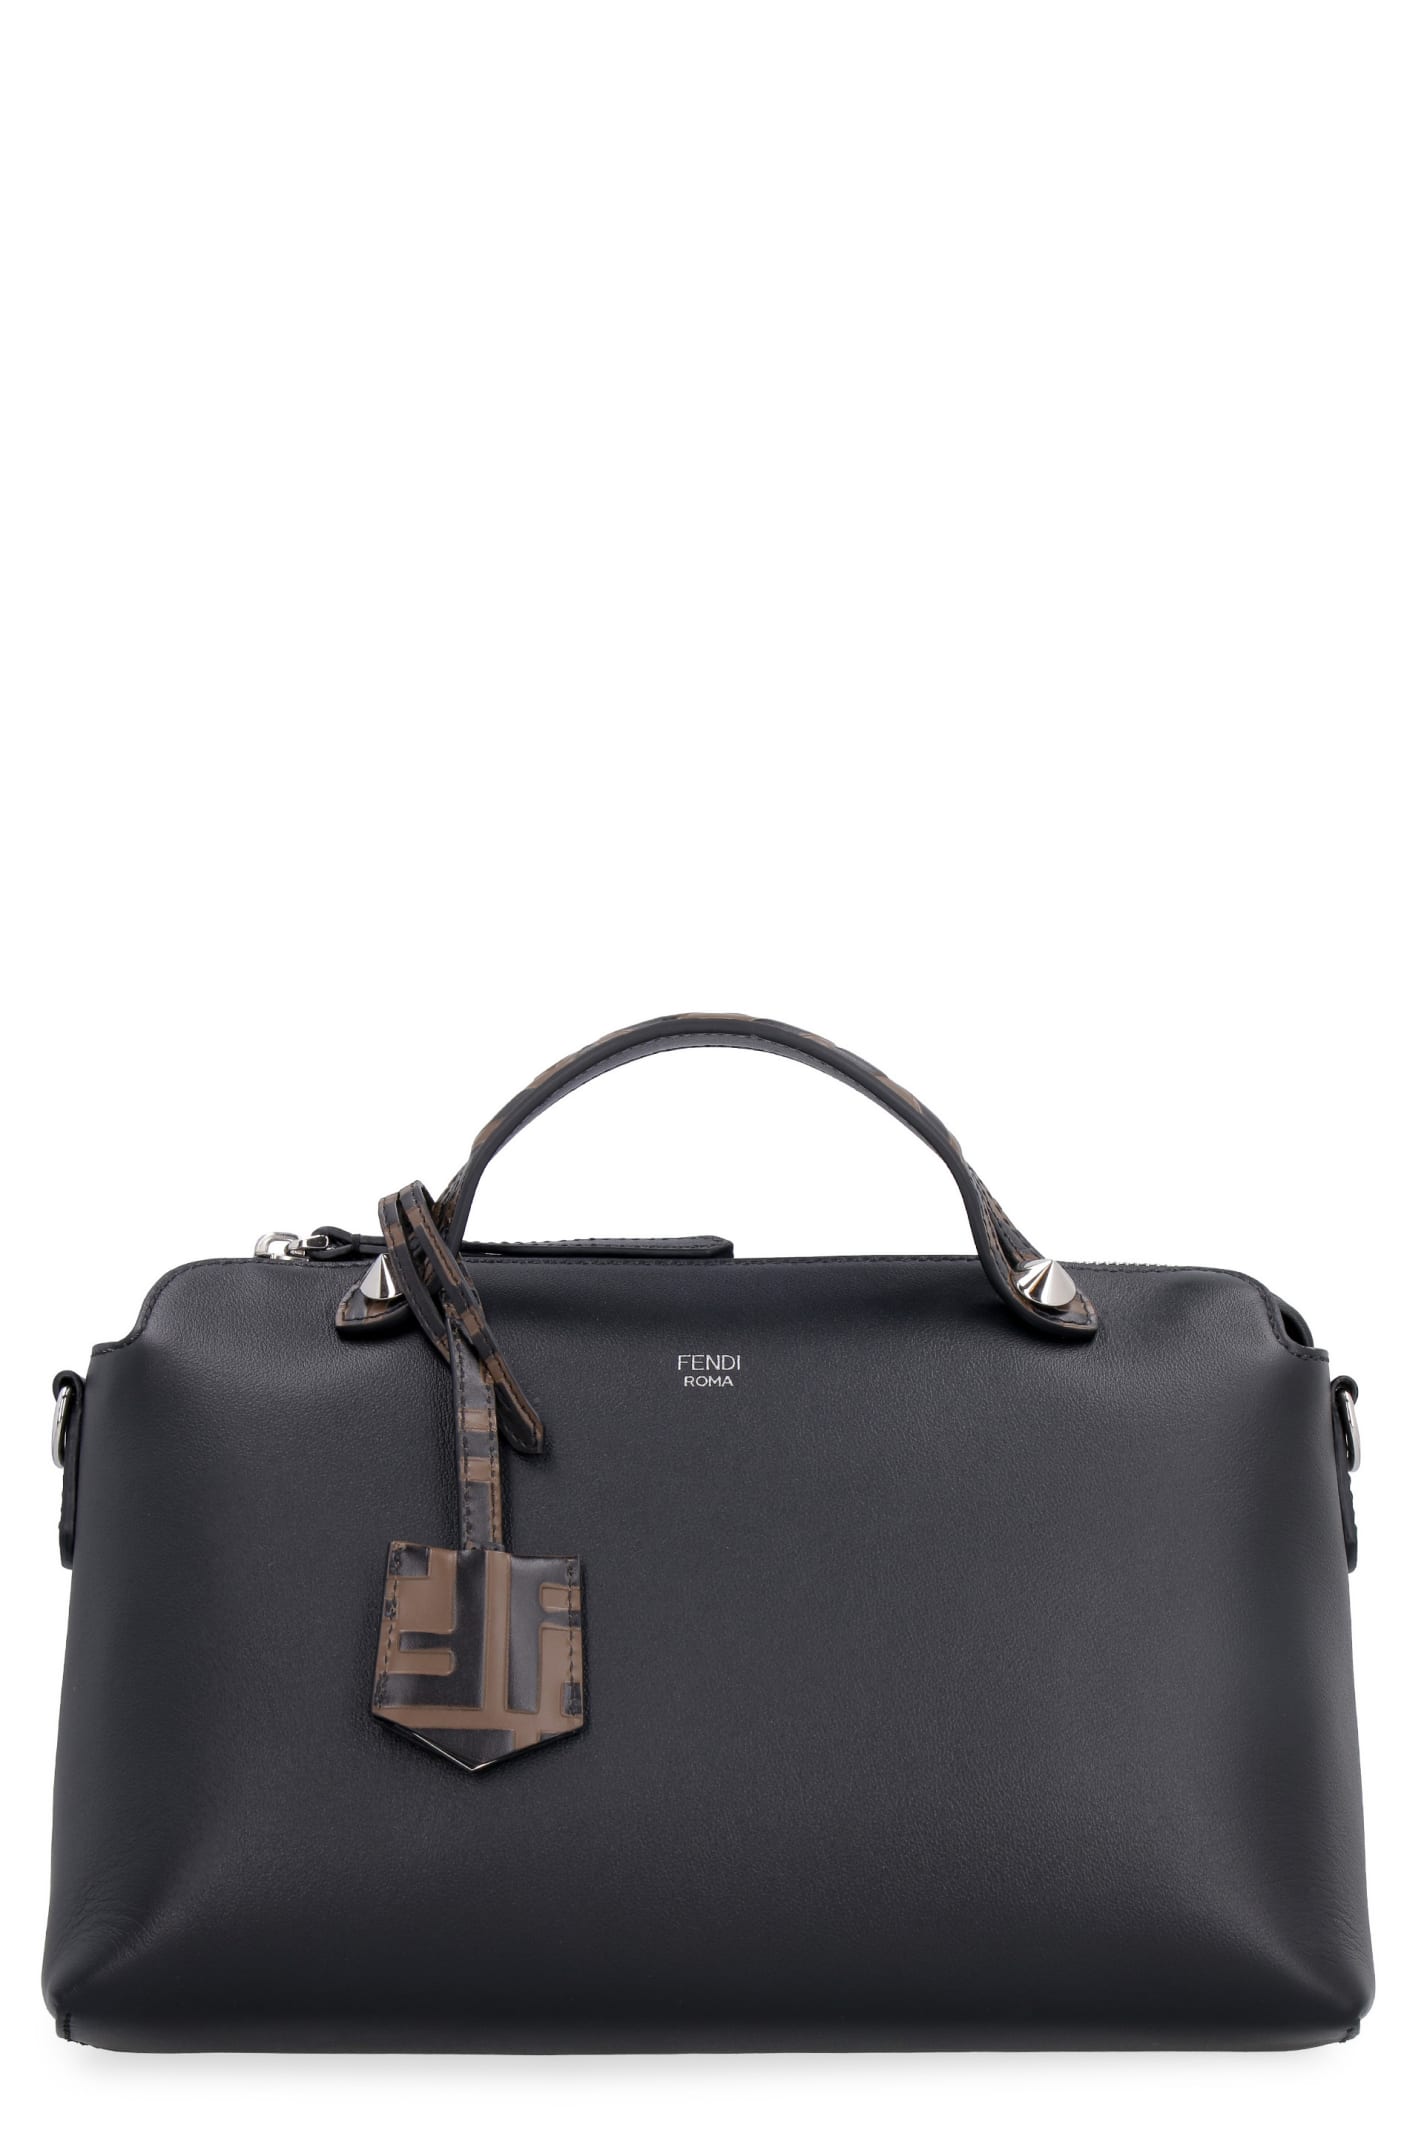 Fendi By The Way Leather Boston Bag In Black